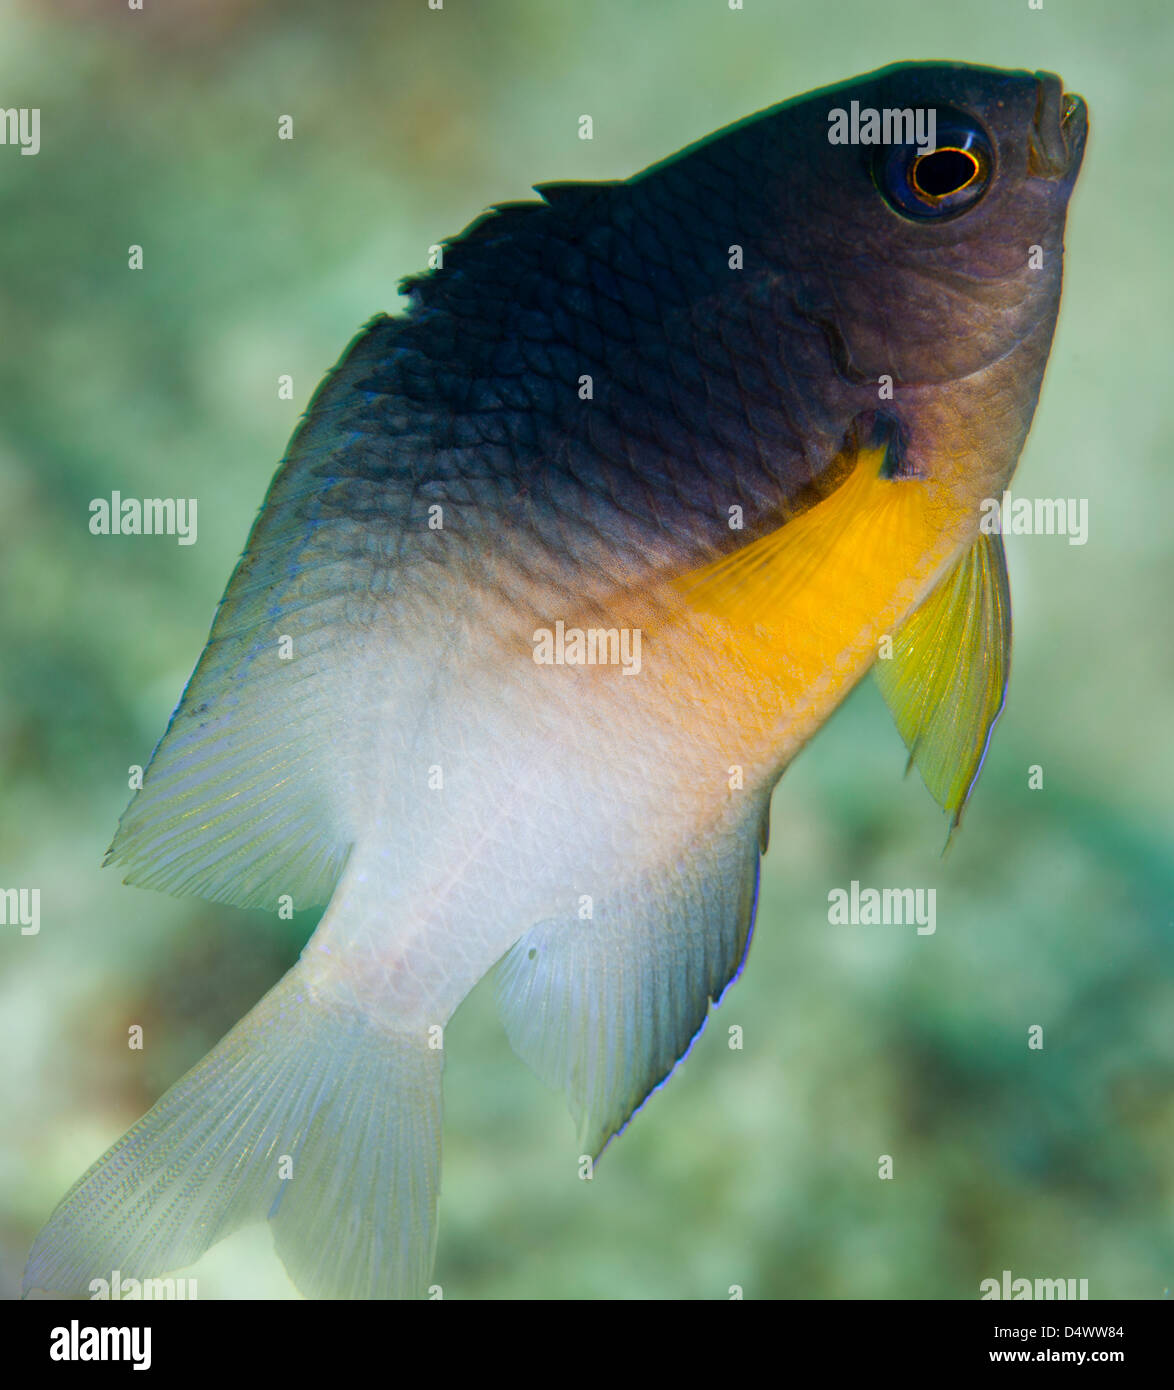 Close-up of a bicolor damselfish (Stegastes partitus) as it swims up from the coral reef off the coast of Key Largo, Florida. Stock Photo